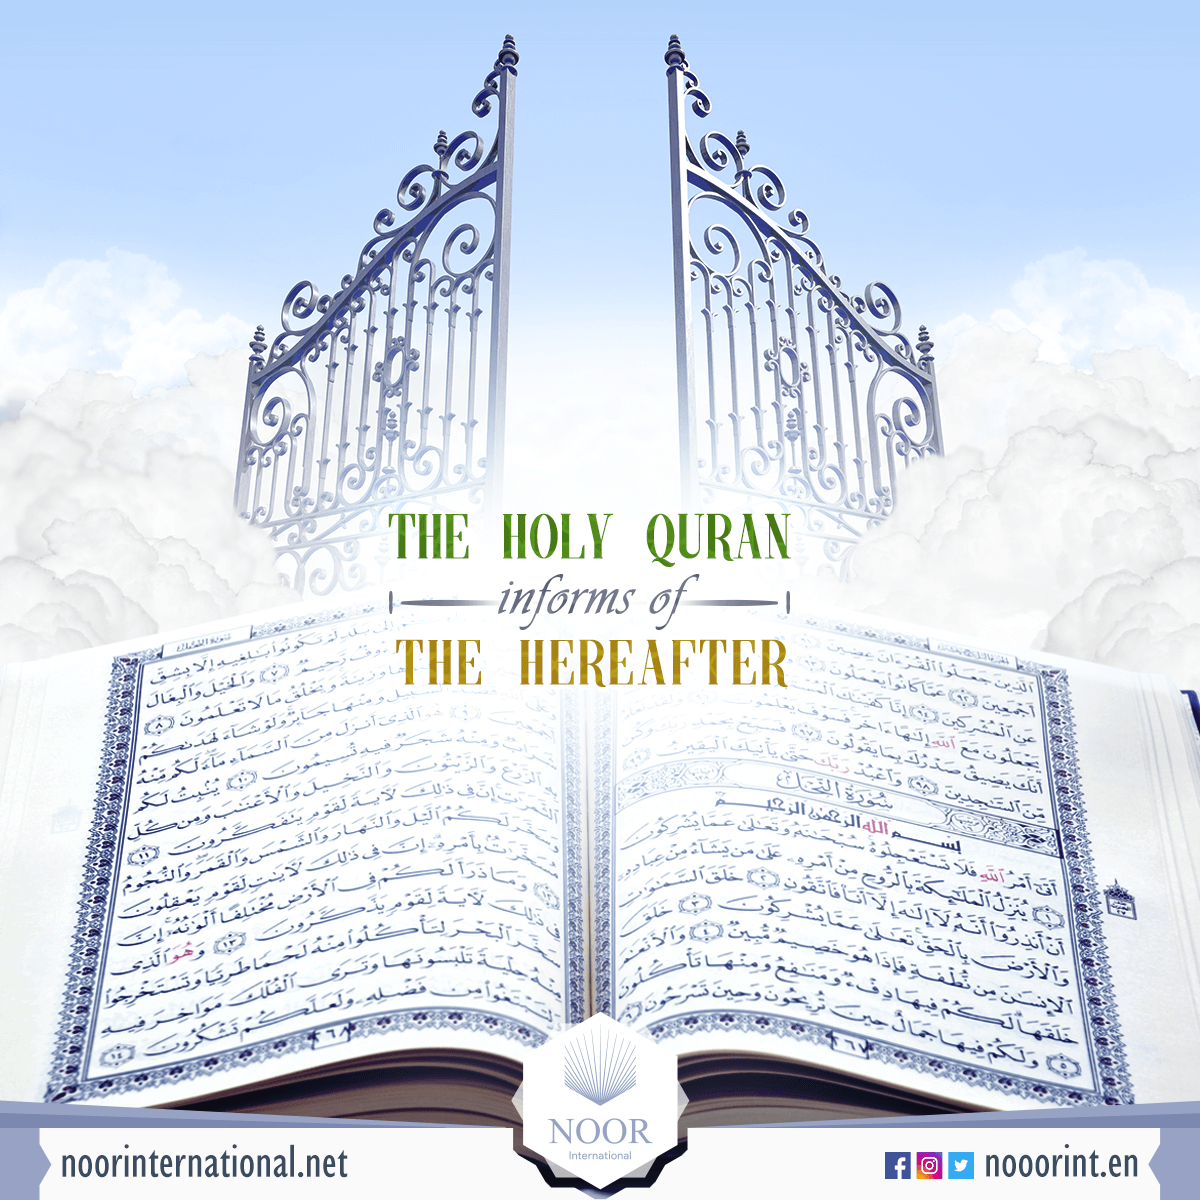 The Holy Quran informs of the Hereafter